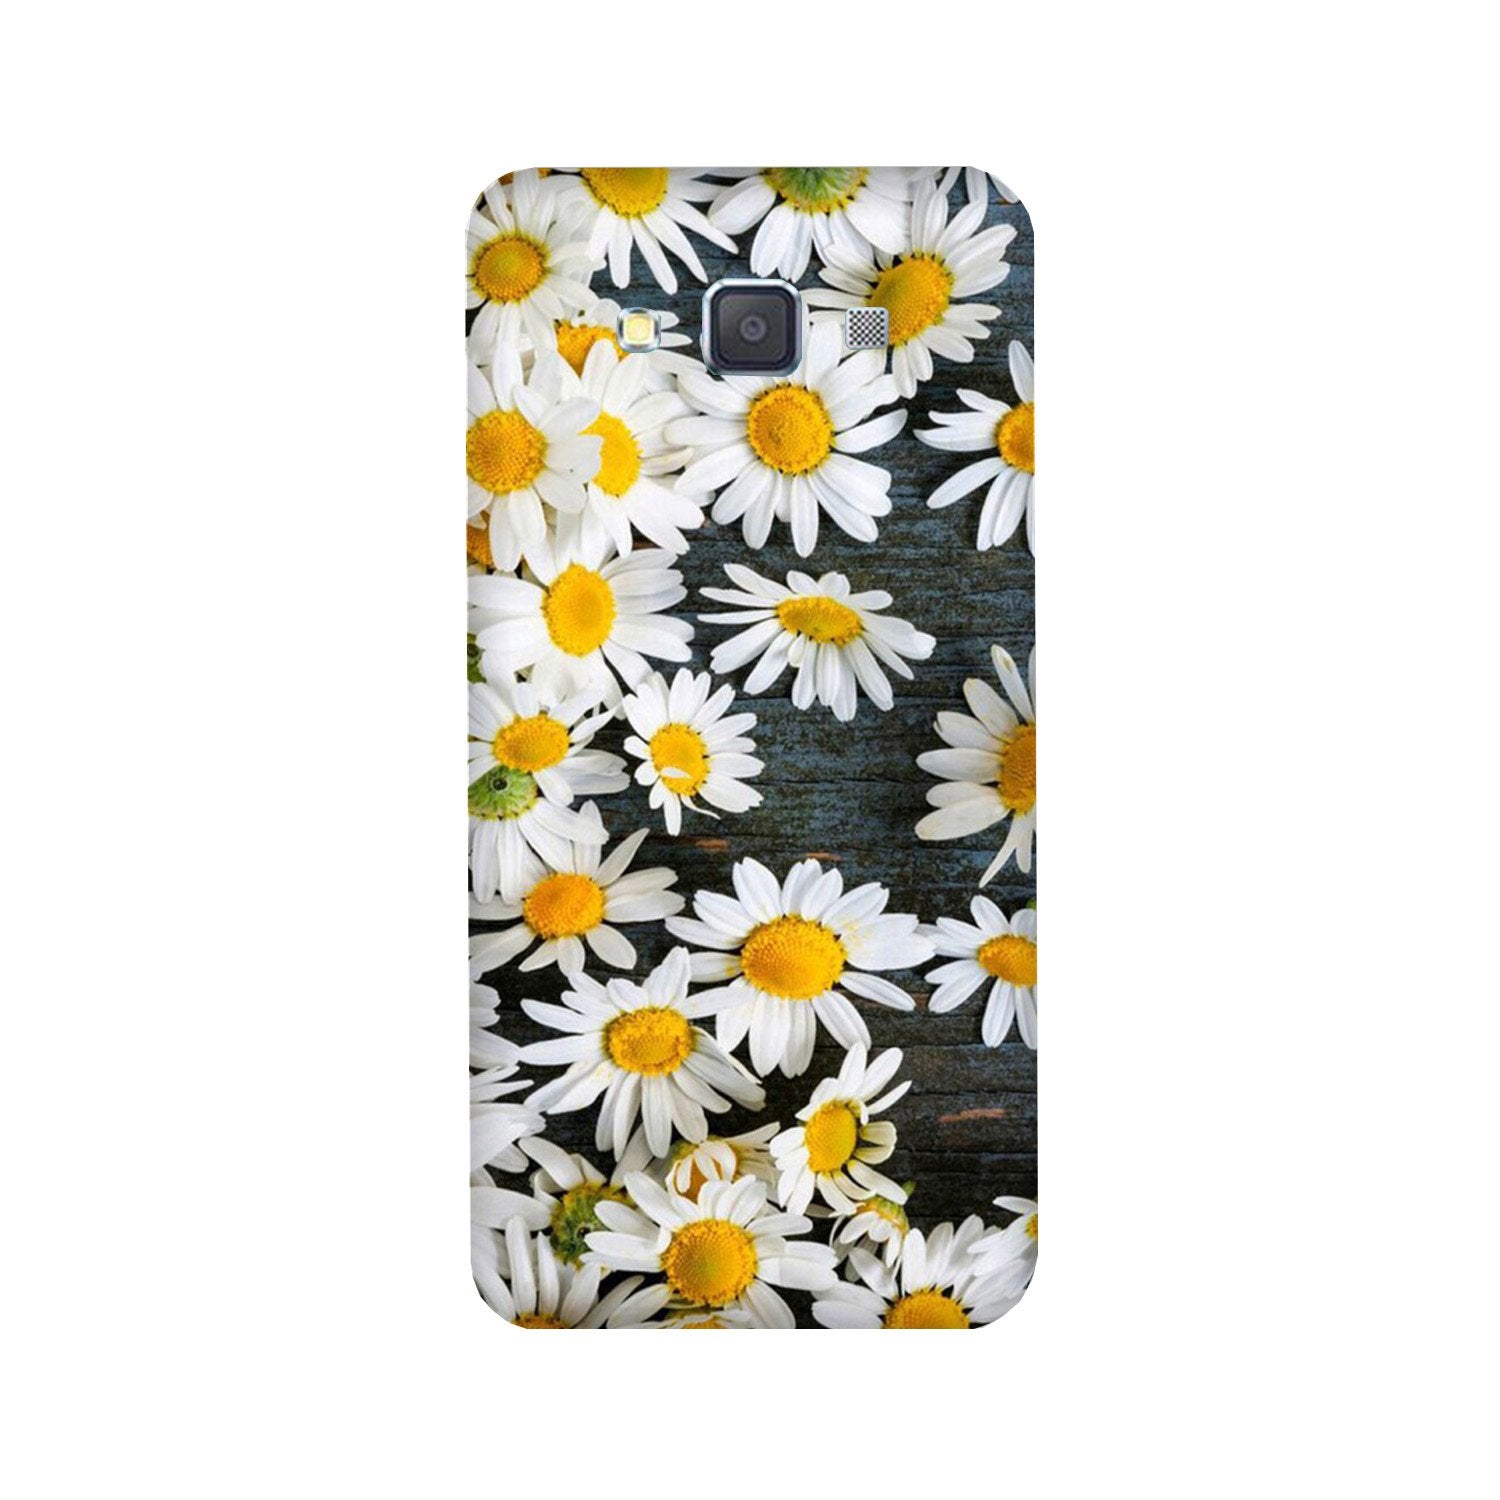 White flowers2 Case for Galaxy A5 (2015)